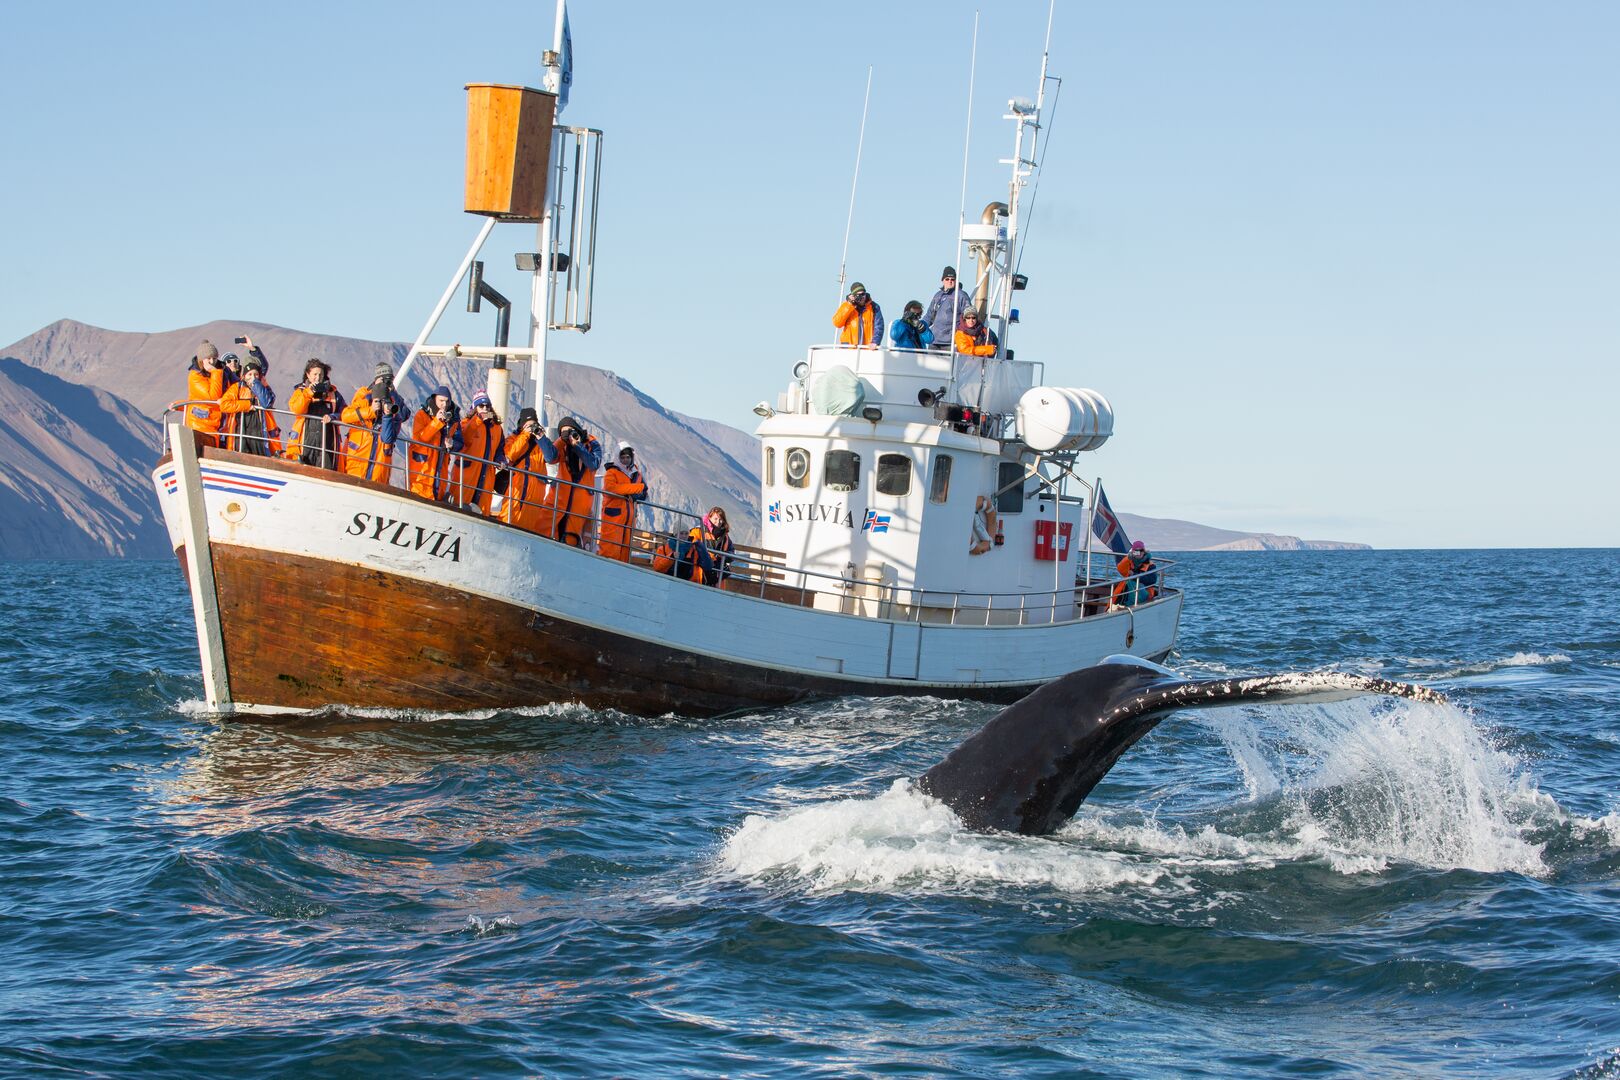 An Icelandic whale-watching boat with people lined up on deck. The people are in orange all-weather suits, photographing a whale tail in the foreground of the photo